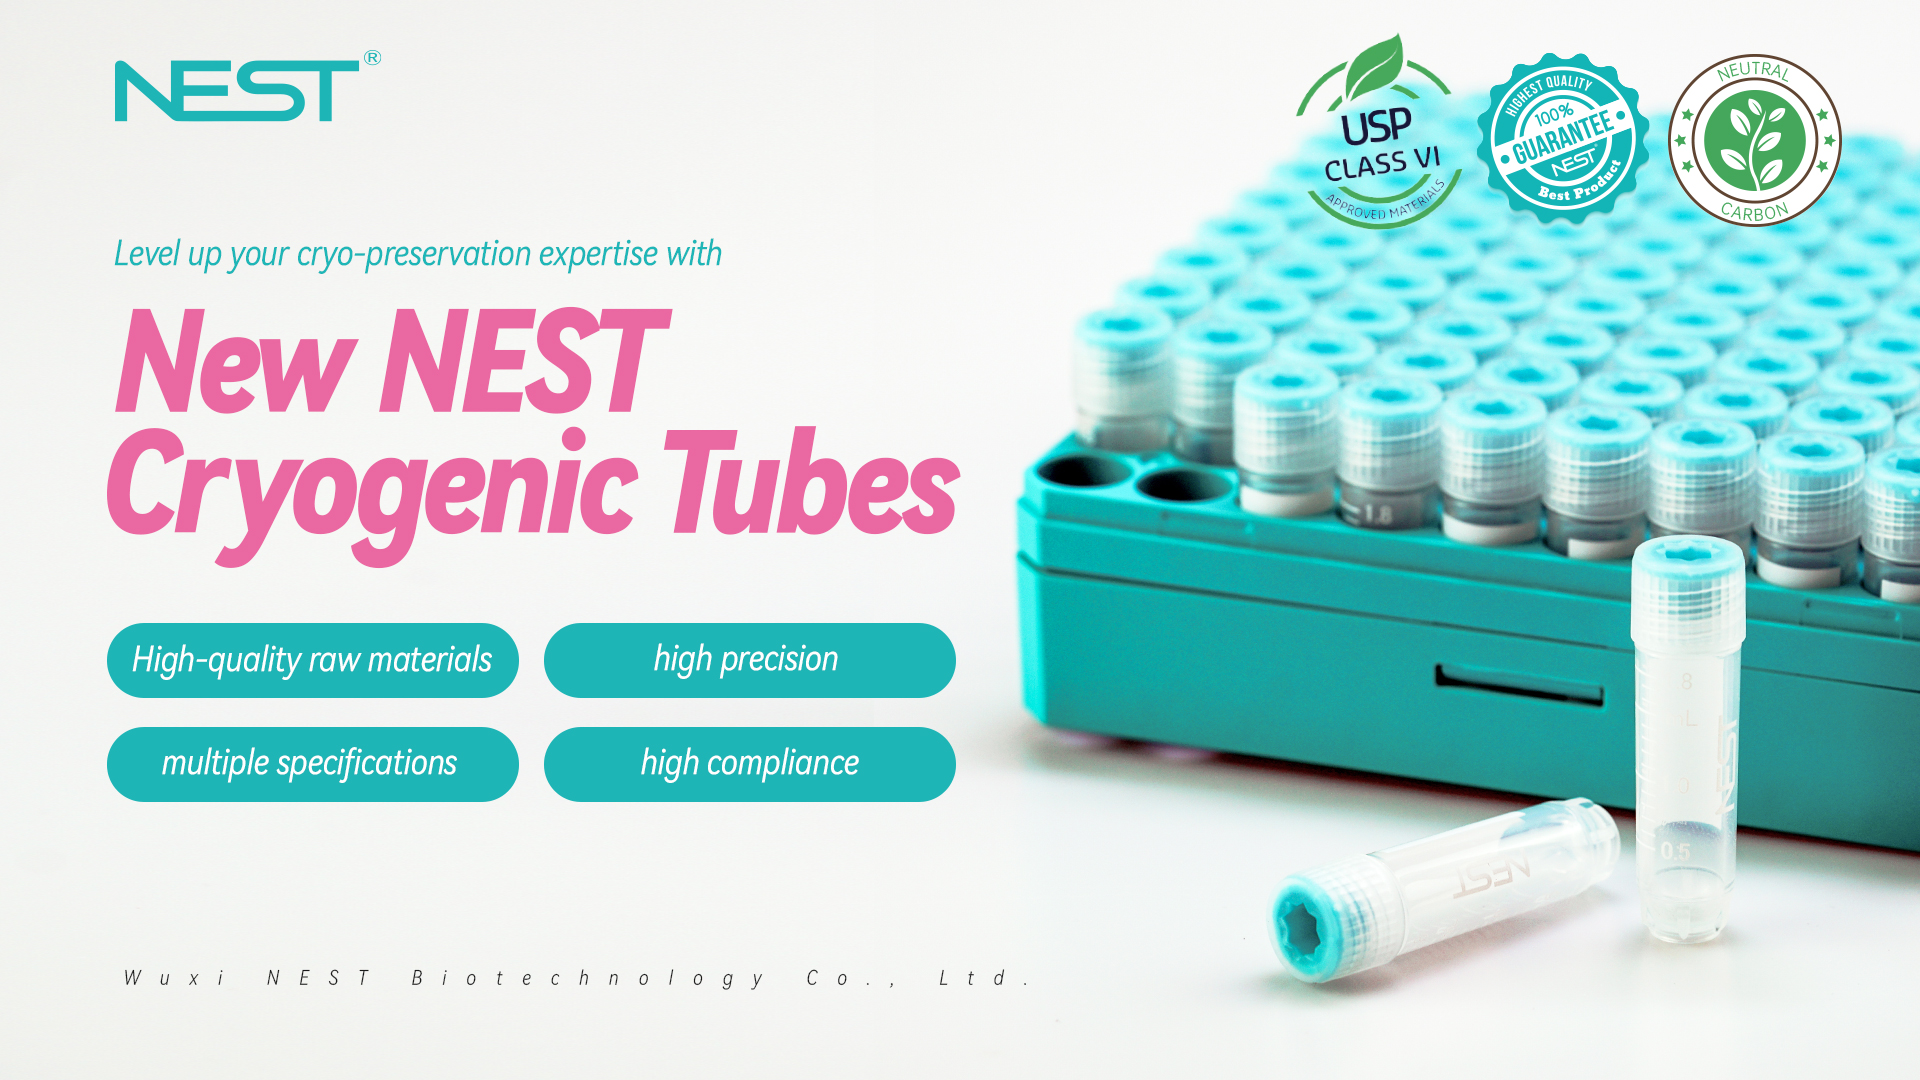 Level up your cryo-preservation expertise with New NEST Cryogenic Tubes